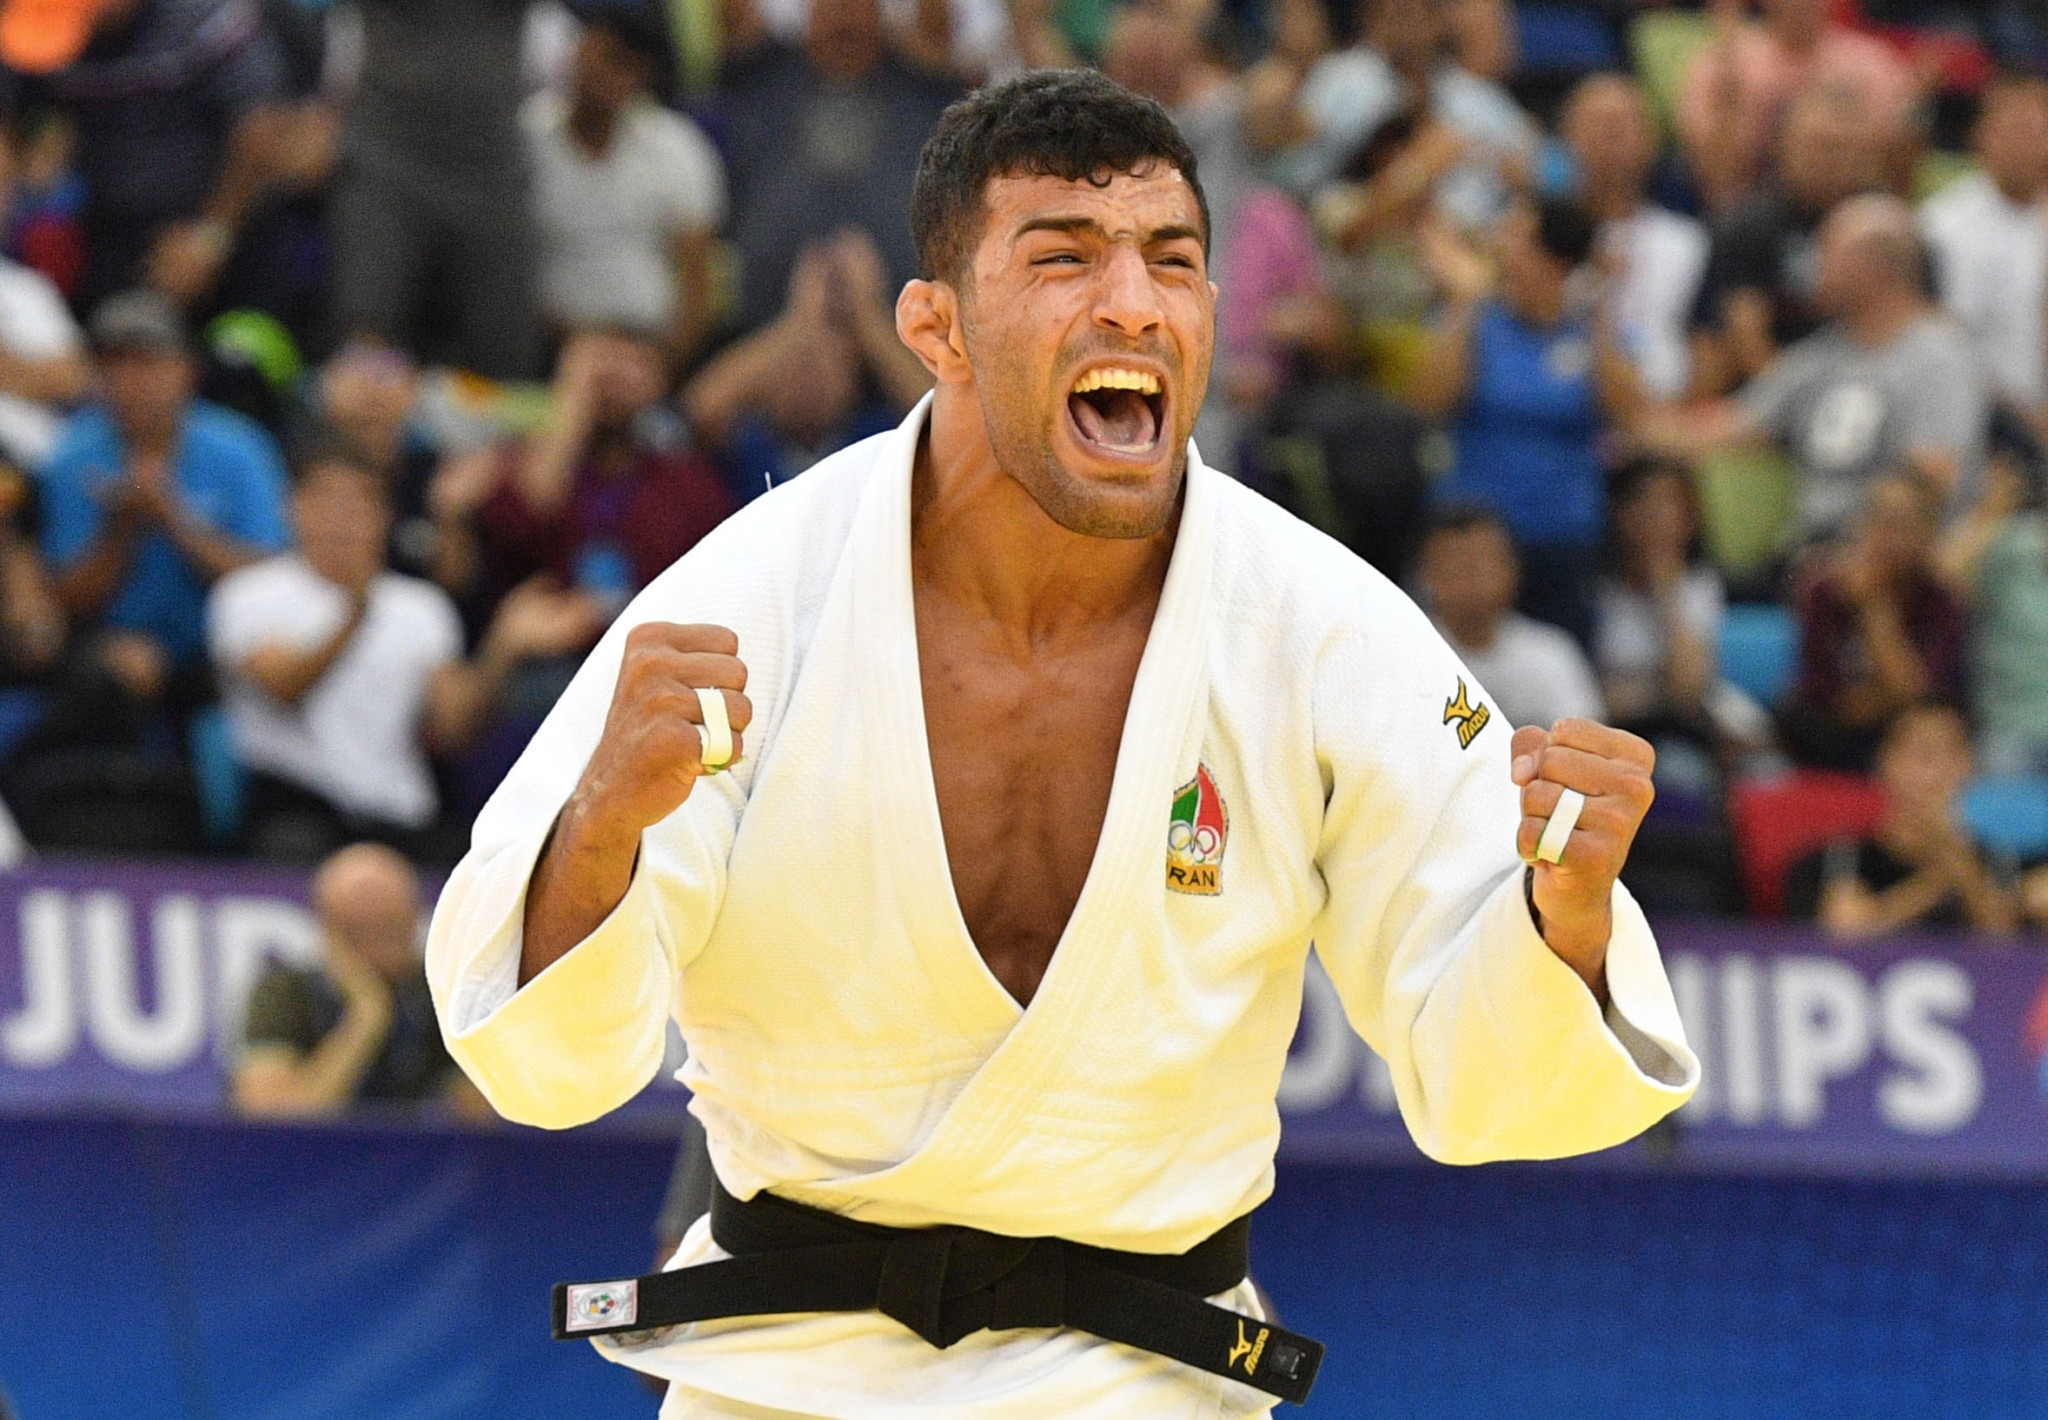 Iran's Saeid Mollaei won the gold medal at the World Judo Championships in Baku in September and is set to return to action at the Grand Prix in The Hague ©Getty Images